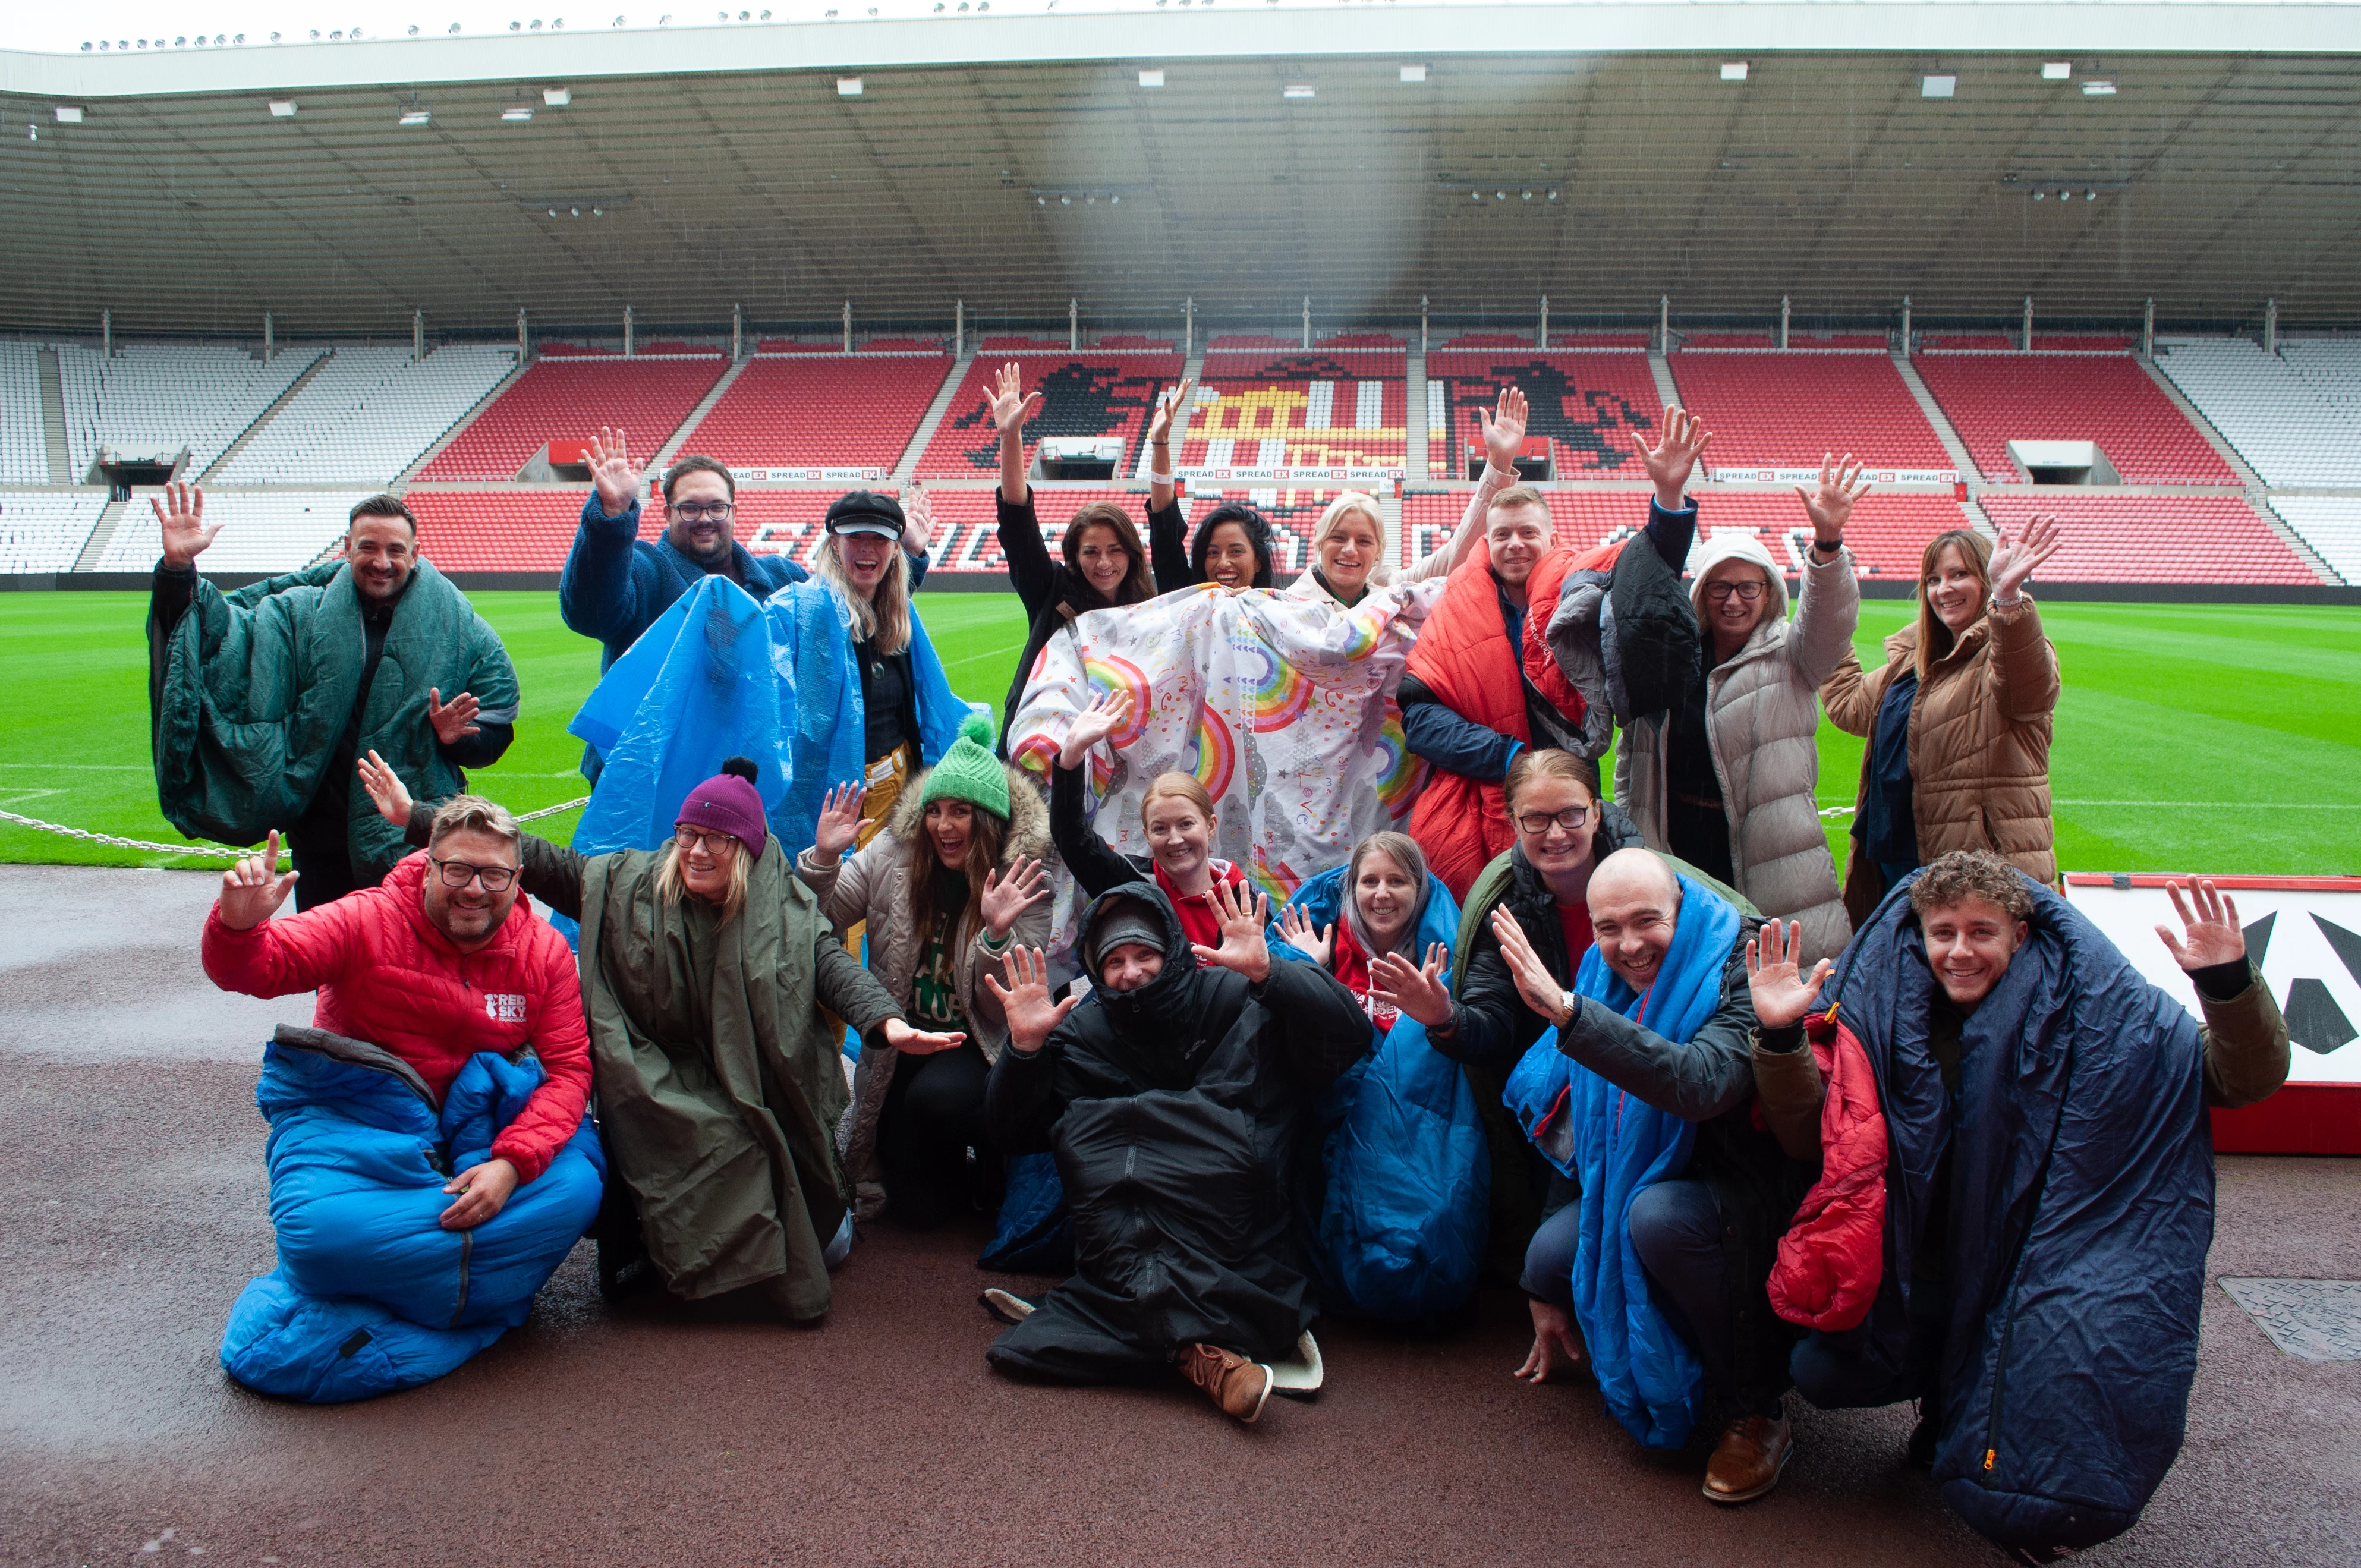 CEO Sleepout CEO Bianca Robinson with participants at Sunderland's Stadium of Light